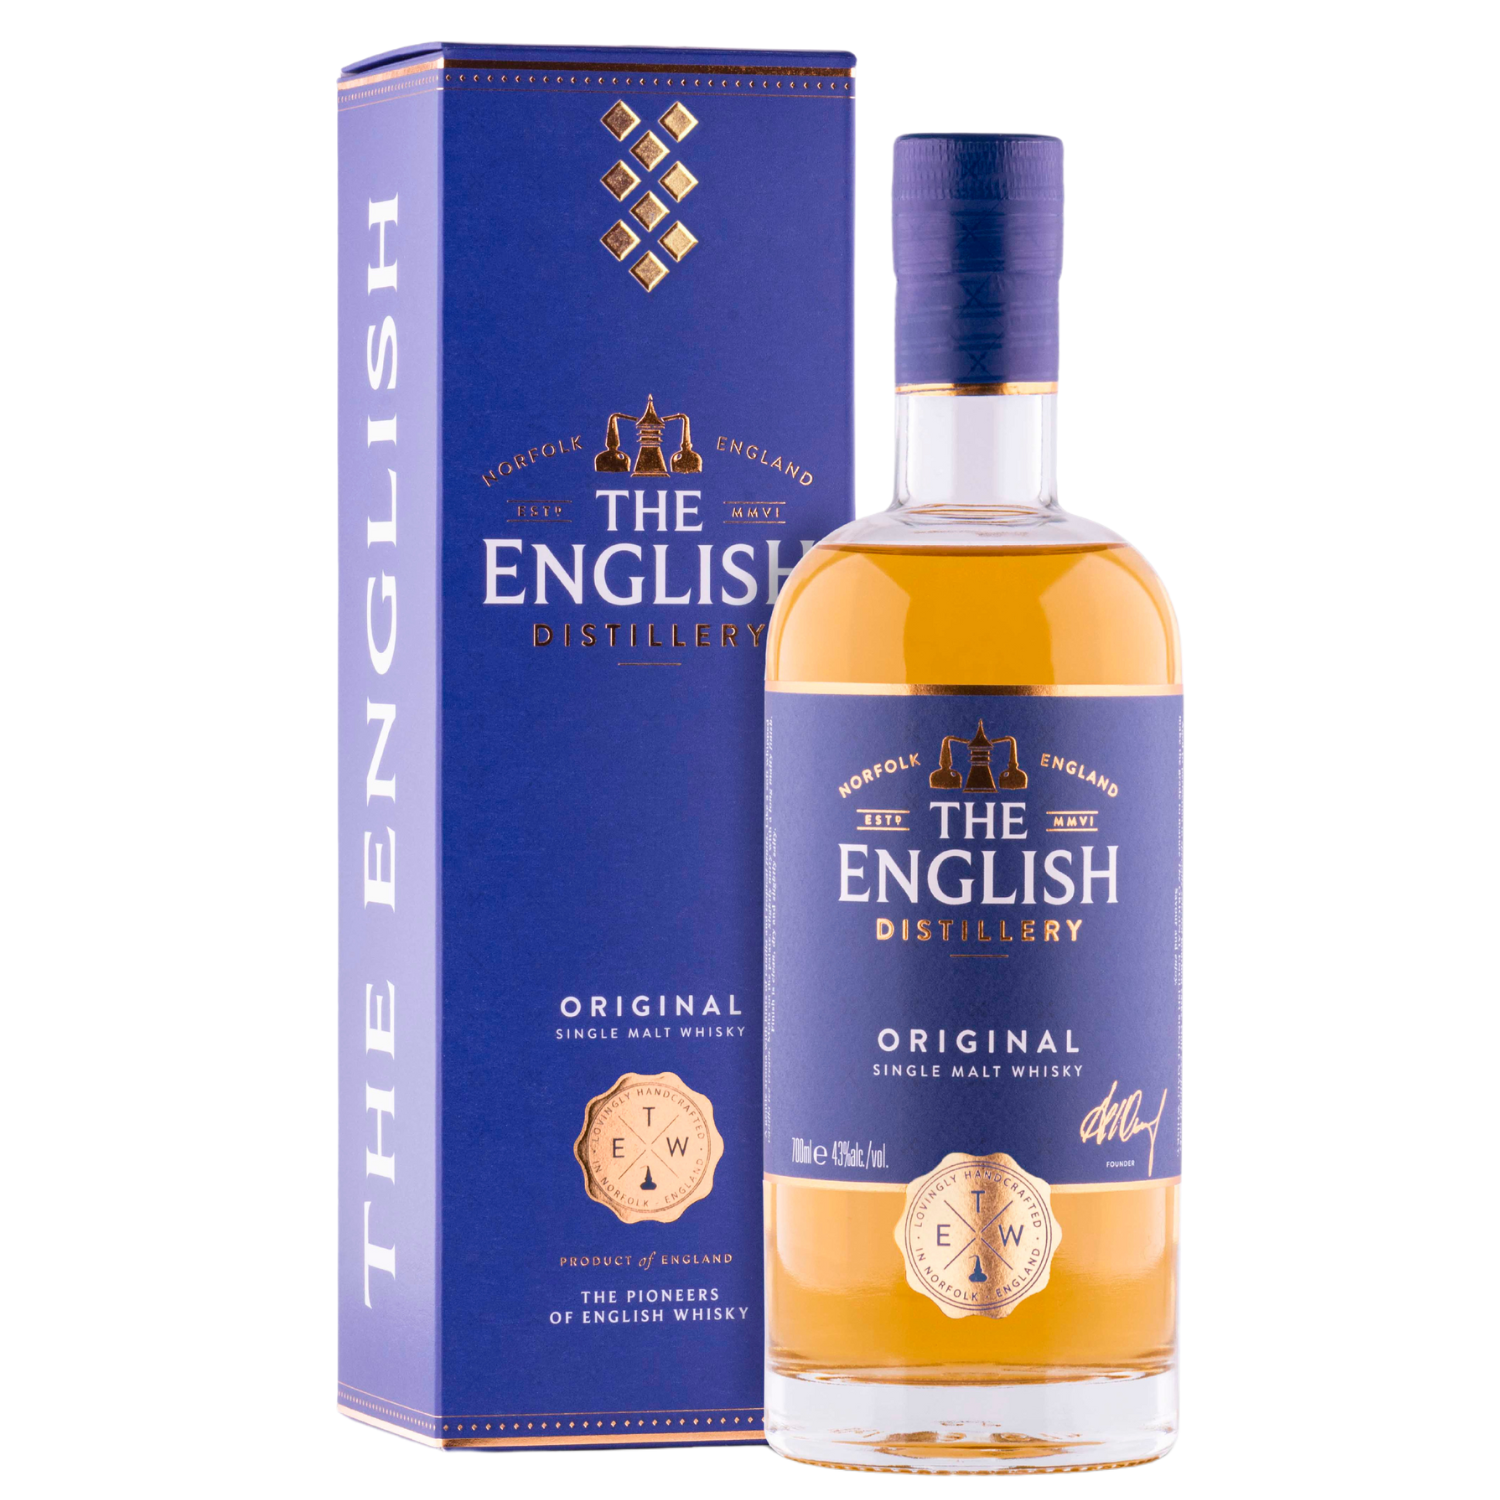 Mangrove  The English Whisky Co. moves distribution to Mangrove UK